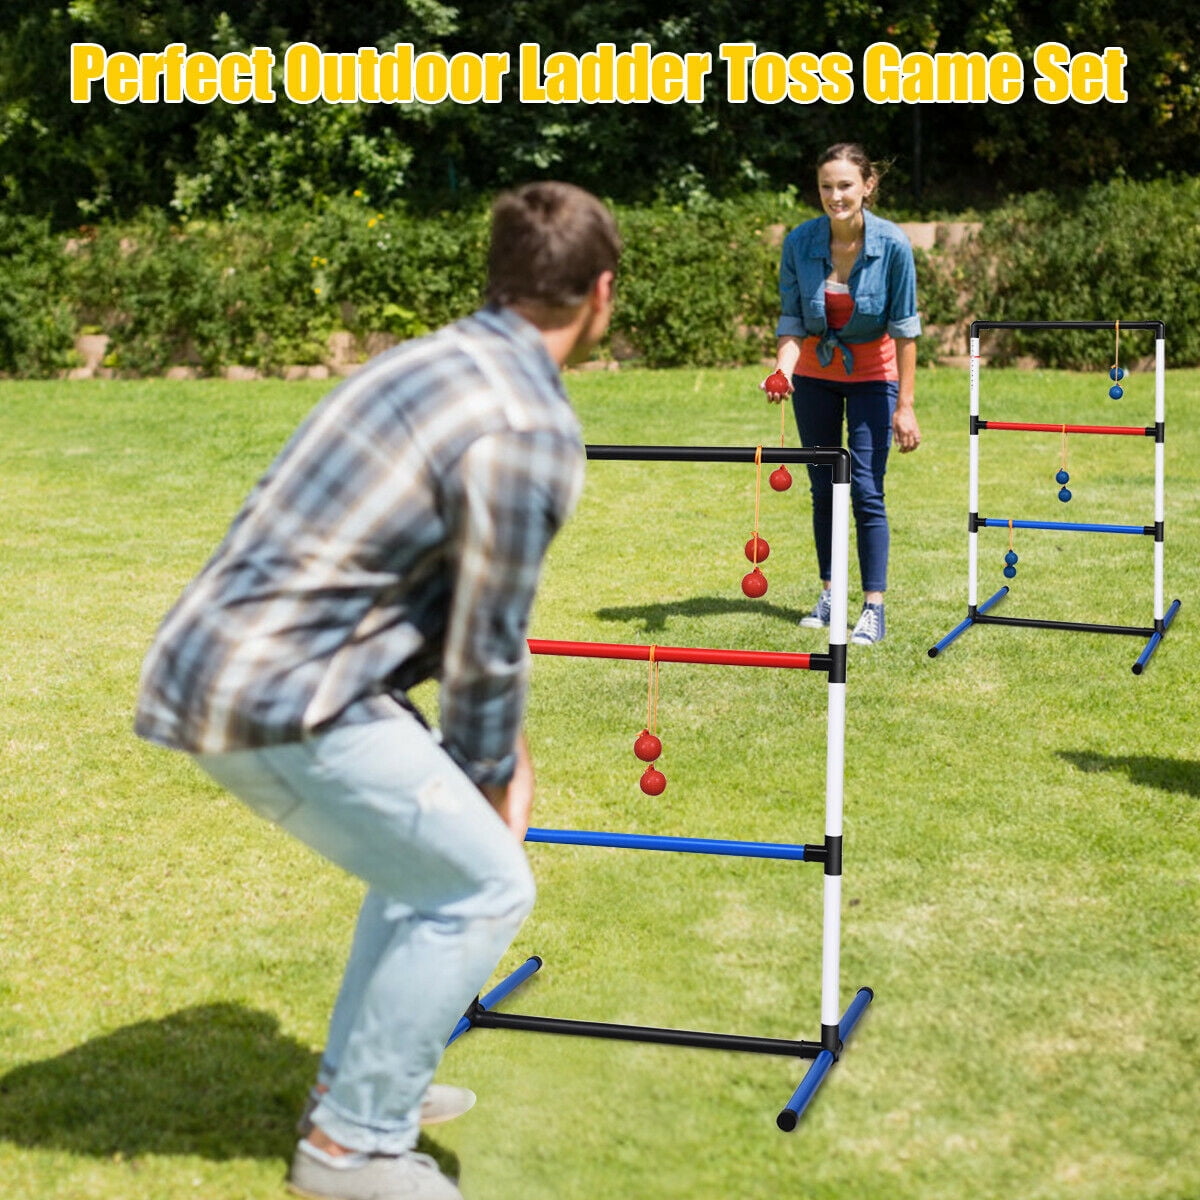 Carrying Case Renewed Maggift Ladder Toss Game Set for Indoor or Outdoor with 6 Bolas 